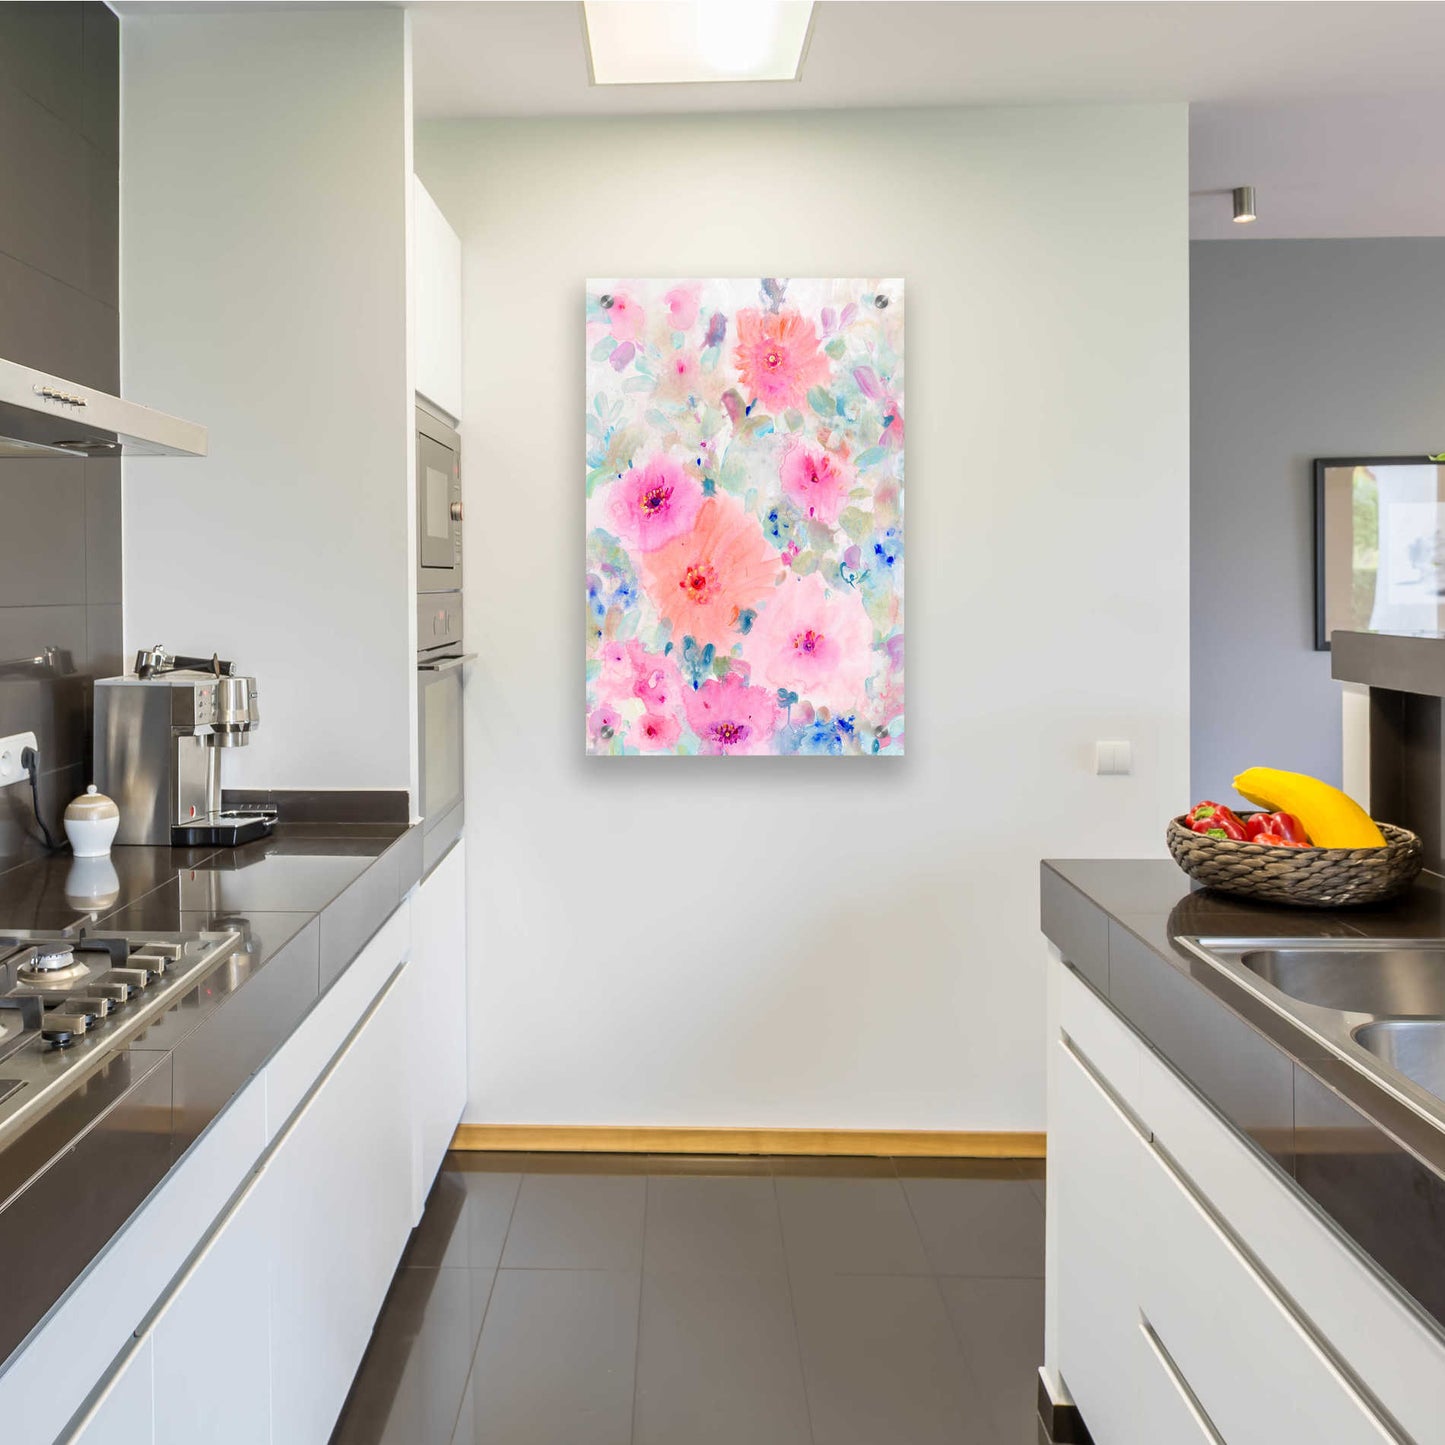 Epic Art 'Bright Floral Design  II' by Tim O'Toole, Acrylic Glass Wall Art,24x36